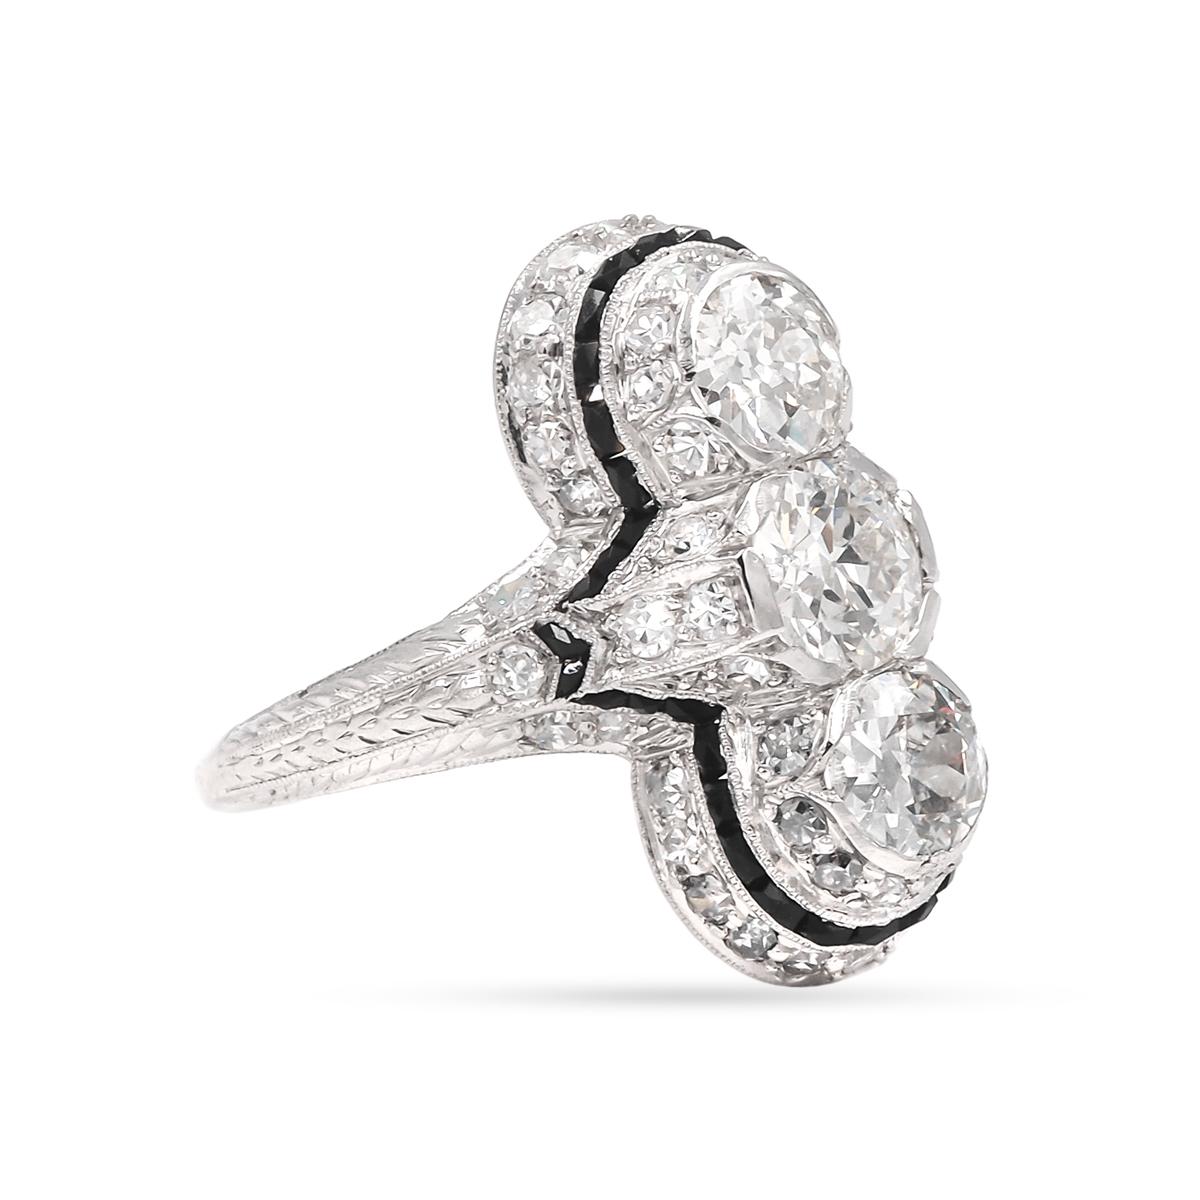 Exquisite Art Deco era 3-stone ring composed of platinum. Featuring 3 Old European Cut diamonds weighing 1.50 carats in total. Accented by 57 Old Single Cut diamonds weighing 0.77 carats in total. Surrounded by a border of French Calibre Cut Black